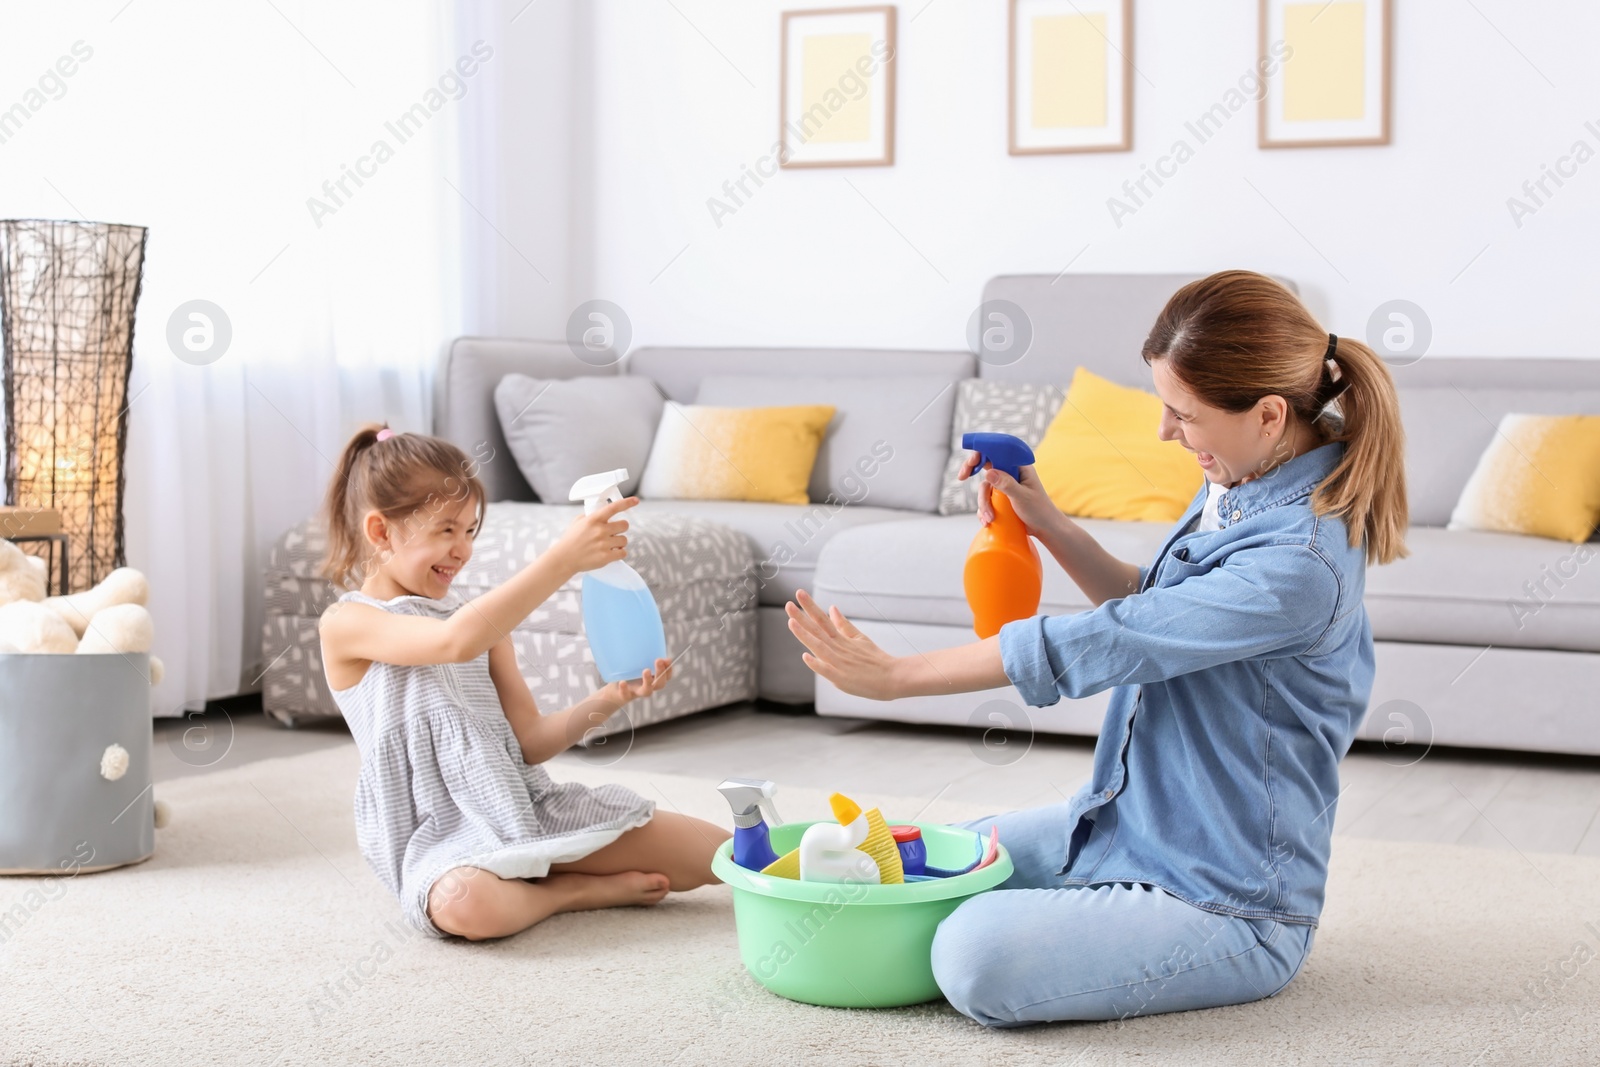 Photo of Housewife and daughter having fun while cleaning home